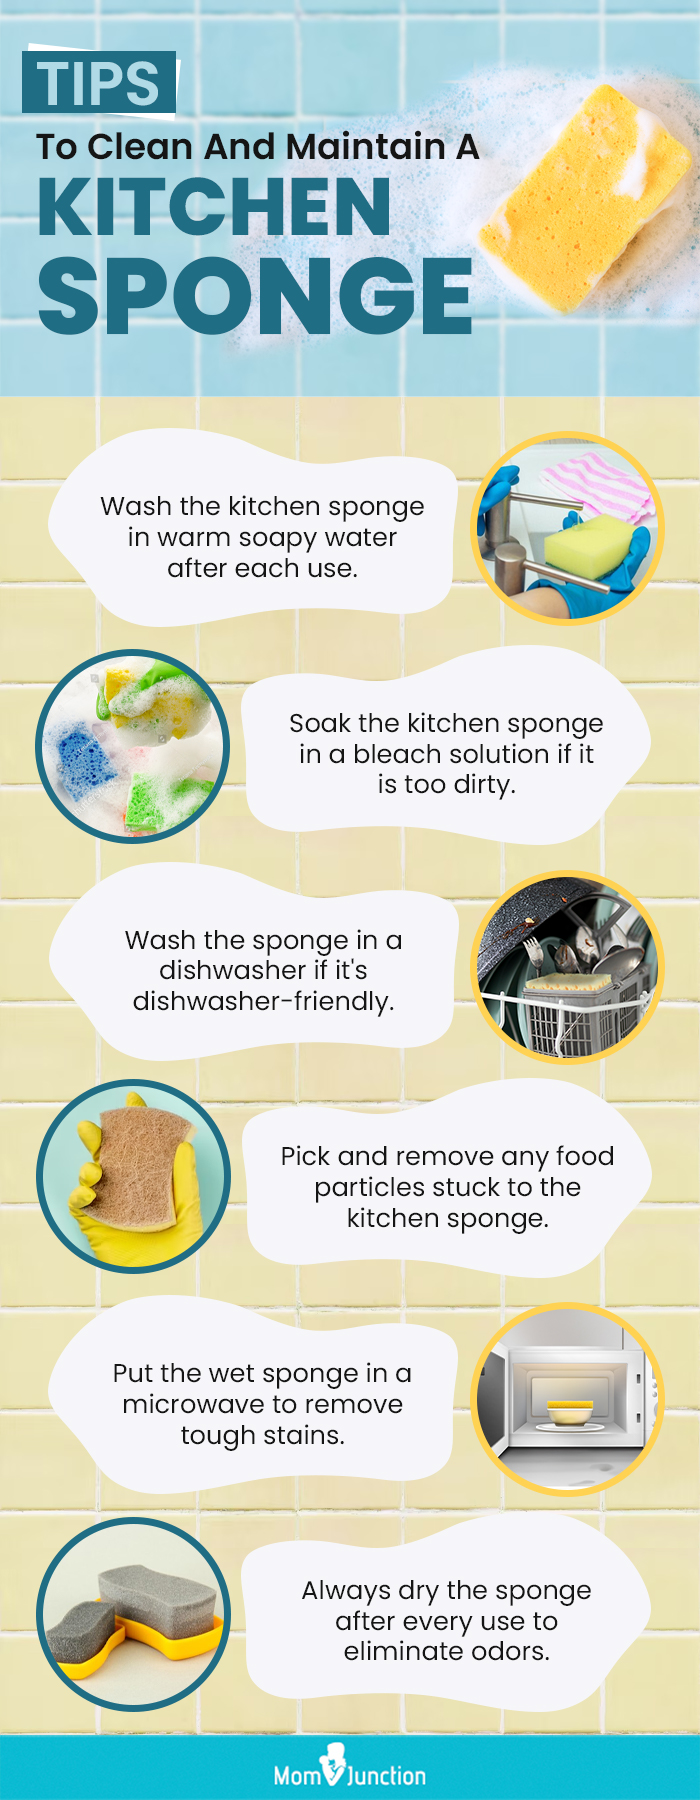 Tips To Clean And Maintain A Kitchen Sponge (infographic)